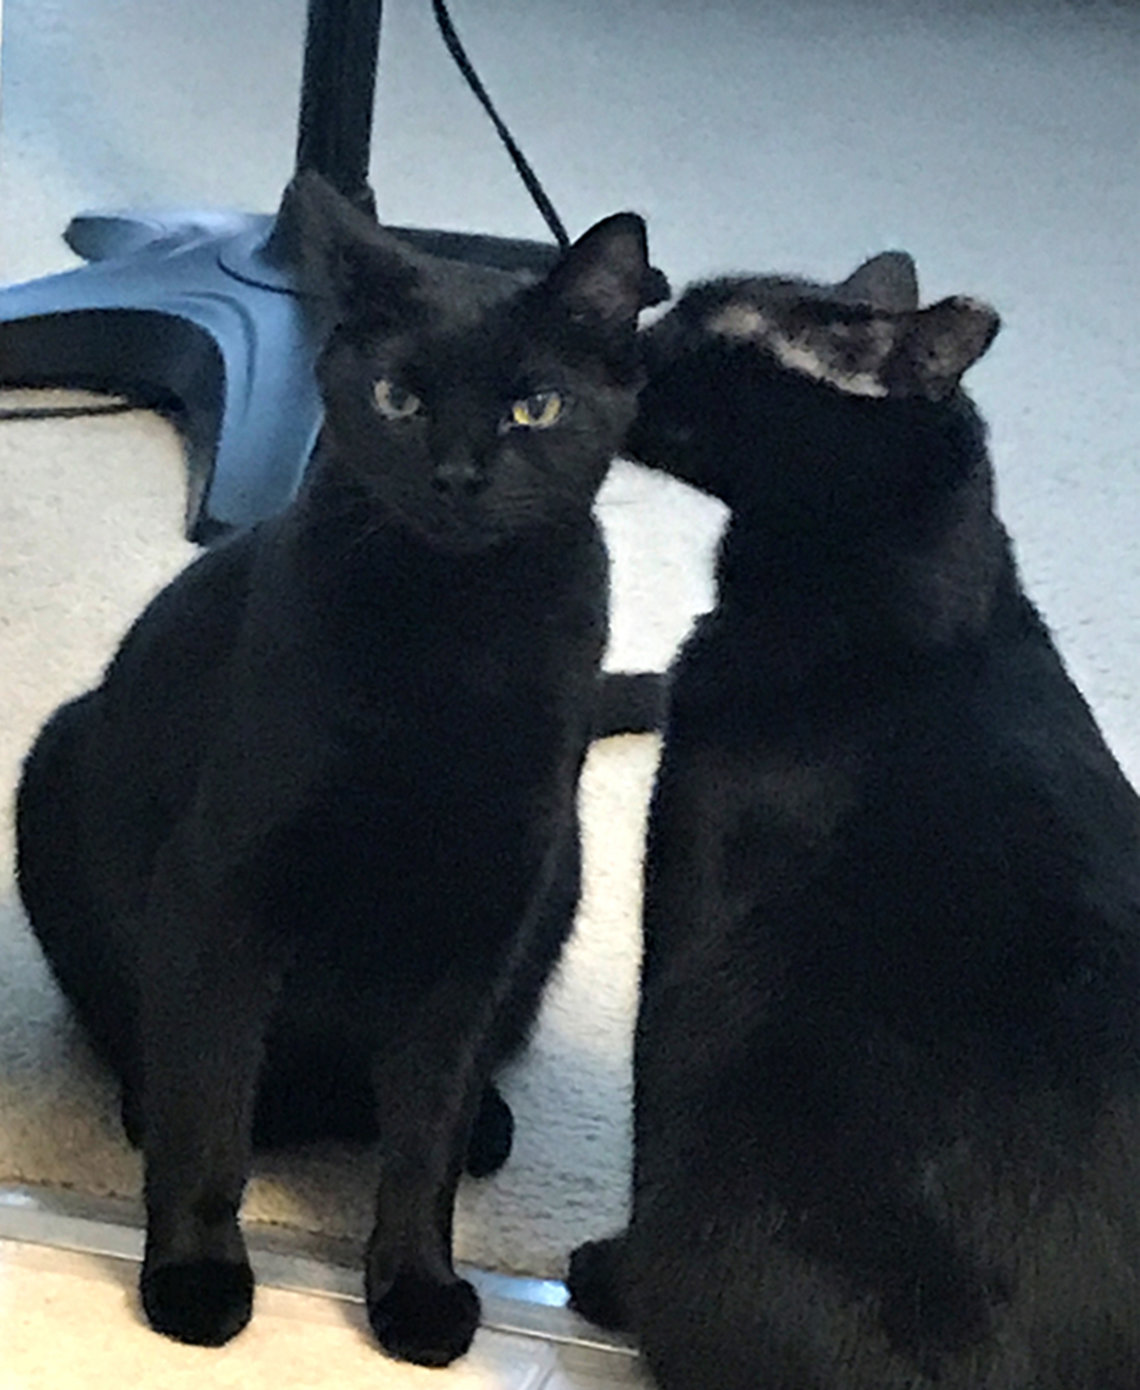 Two black cats--one looks to be whispering in the other's ear